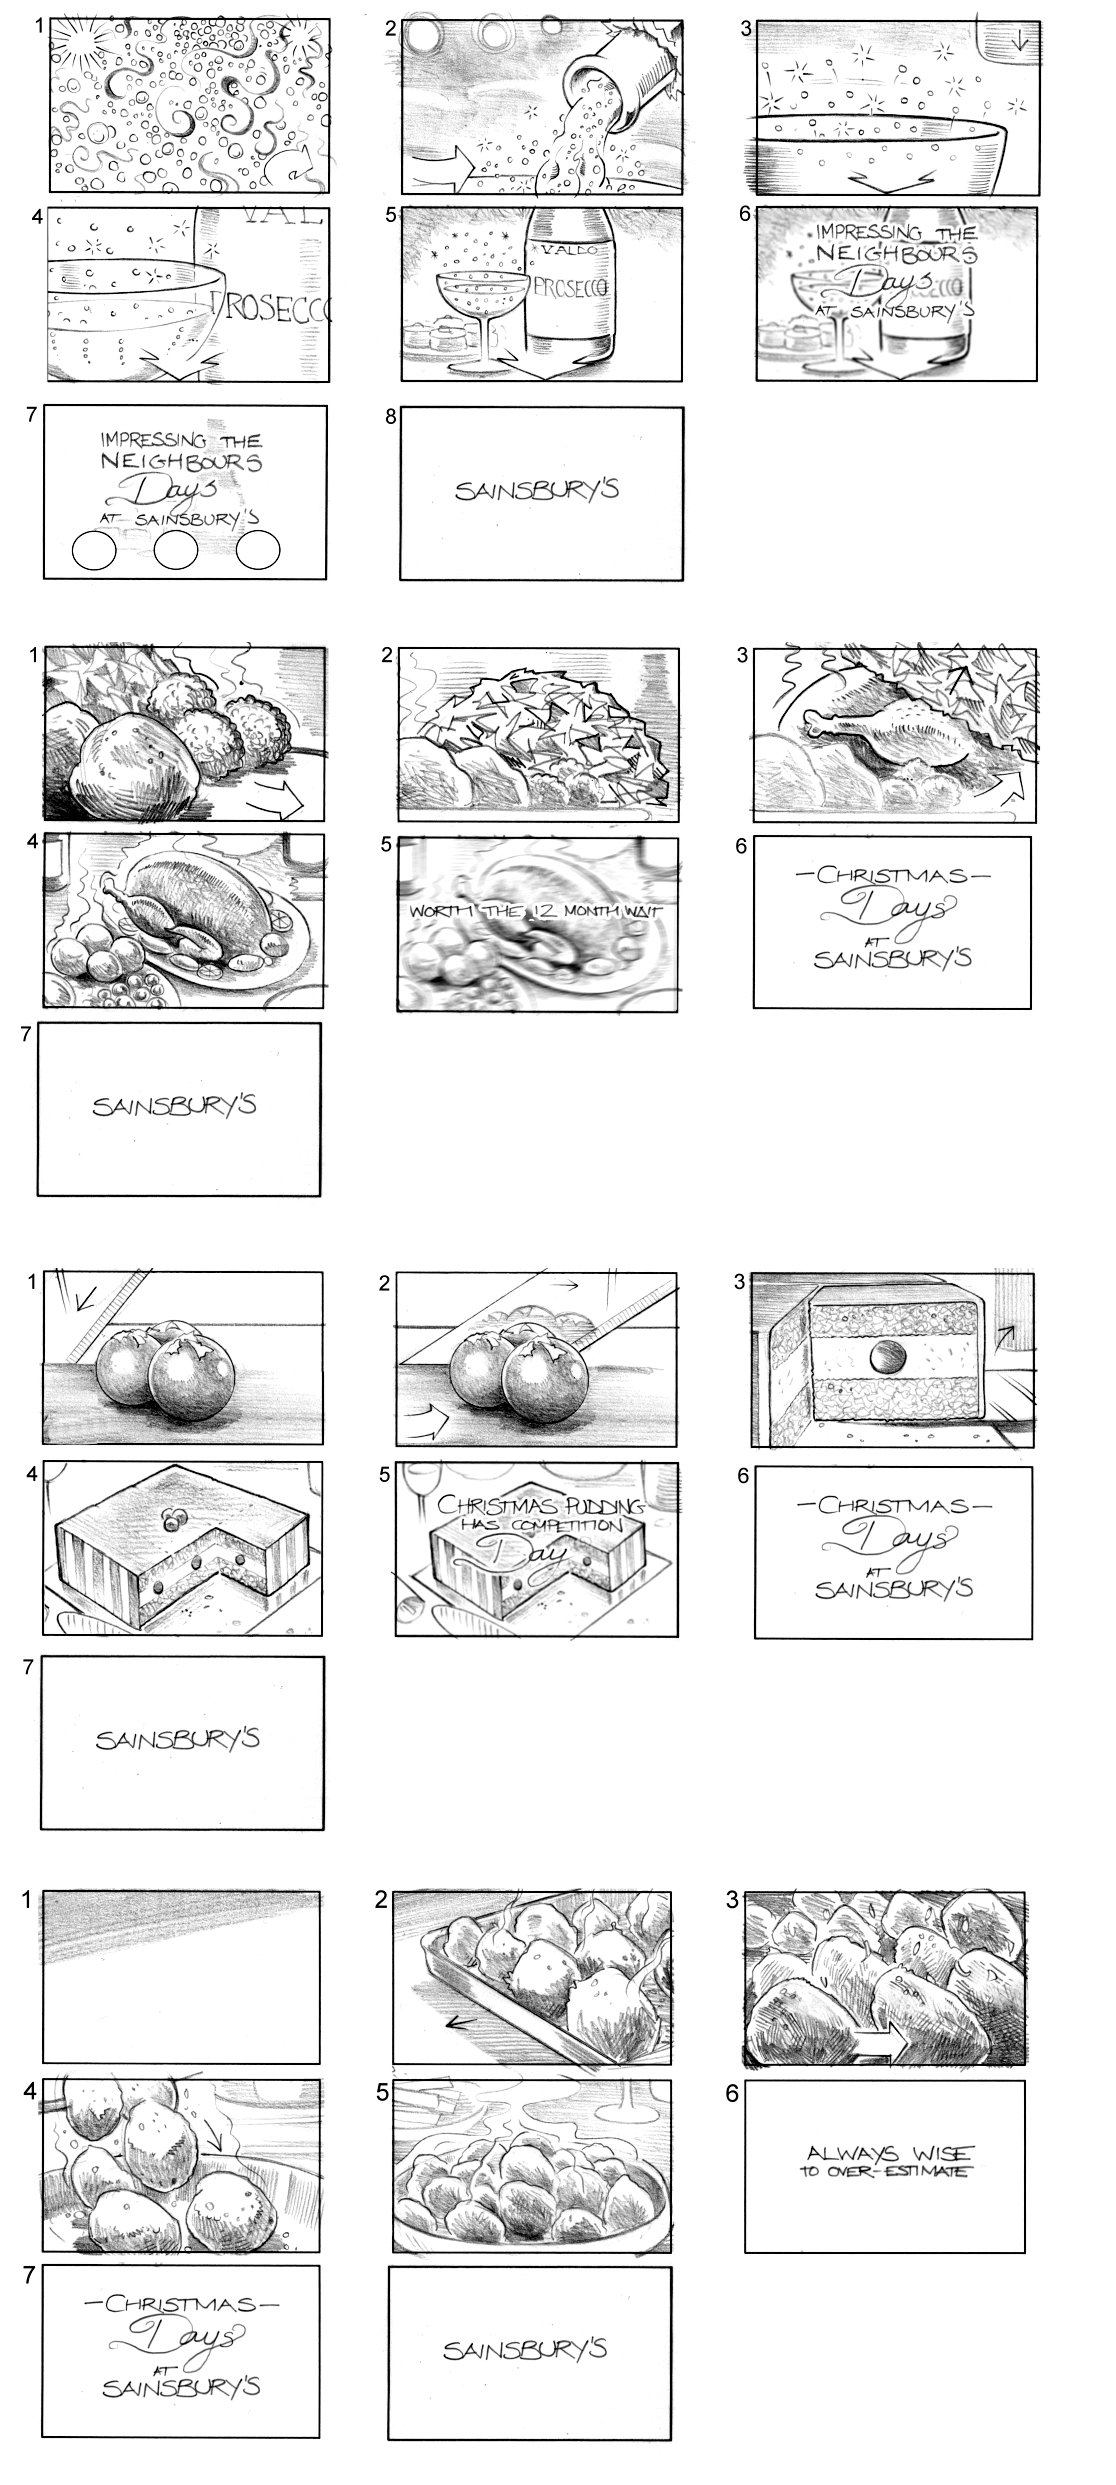 SAINSBURY'S STORYBOARD BY ANDY SPARROW